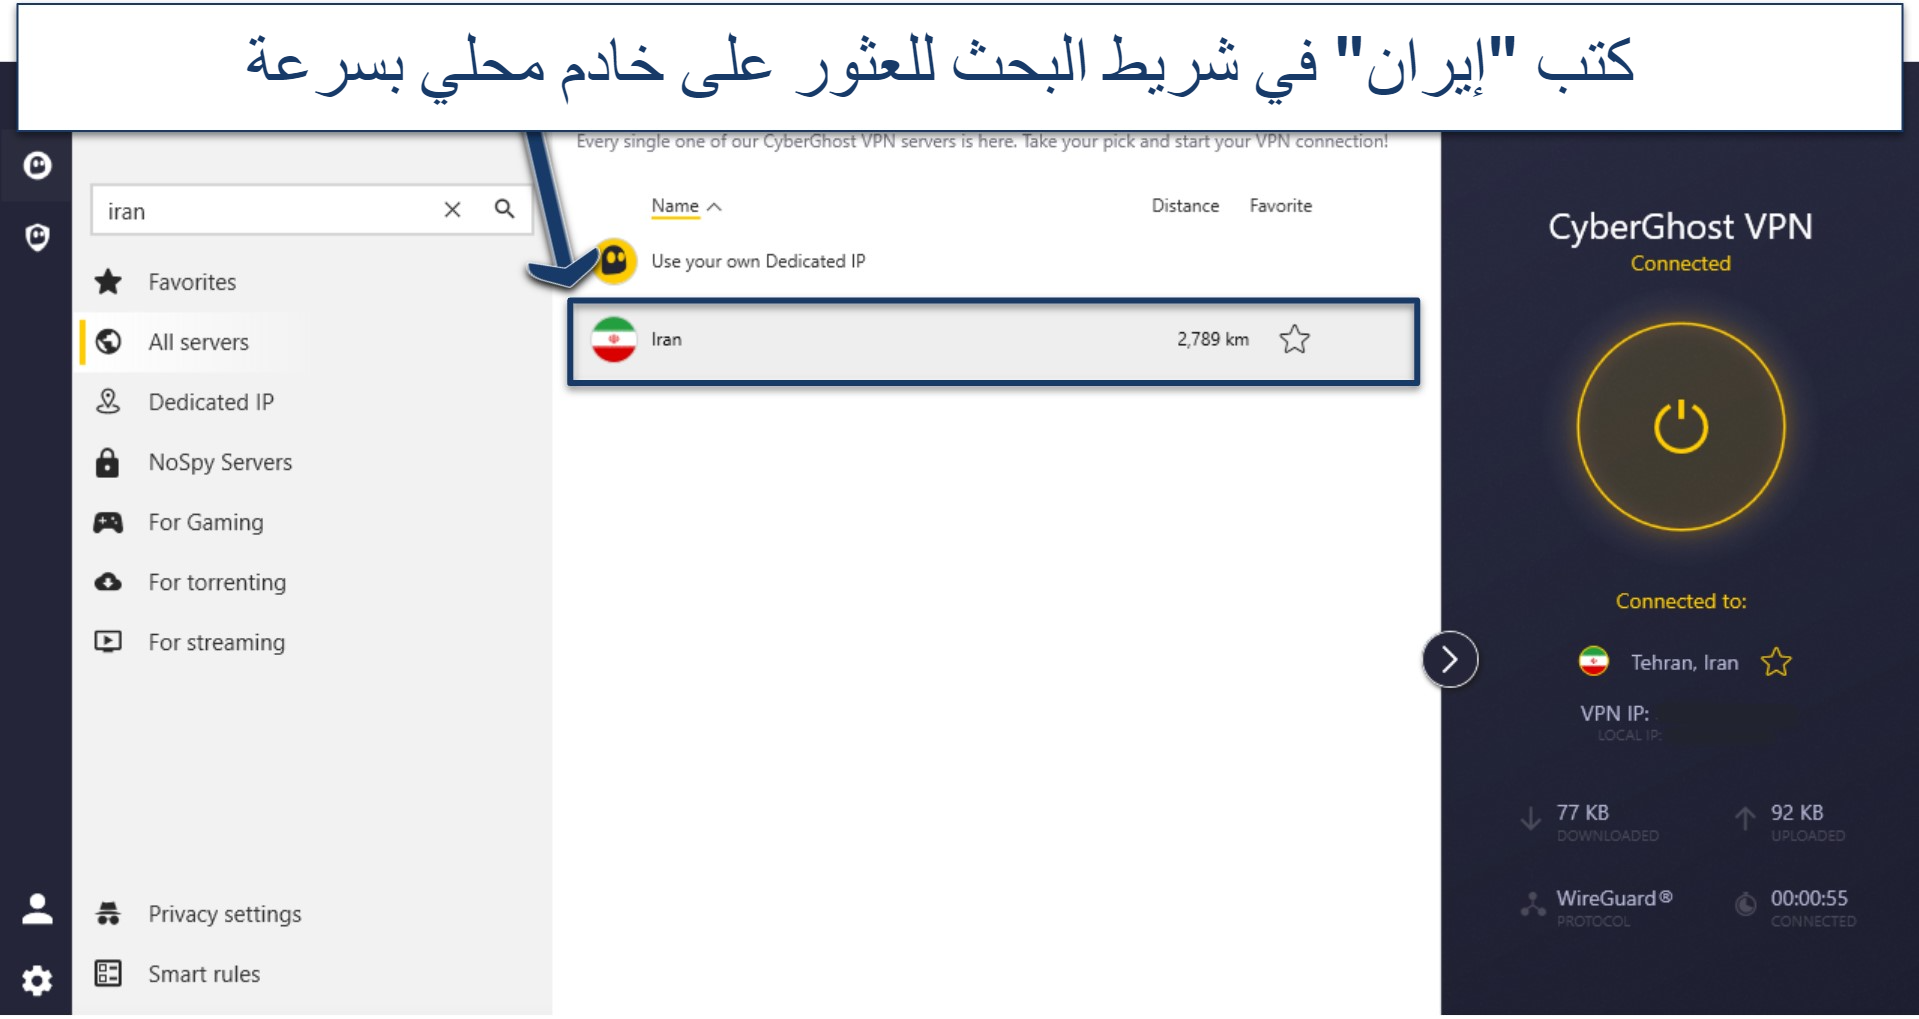 Screenshot of CyberGhost app showing Iran server location, with the VPN connected to Iran